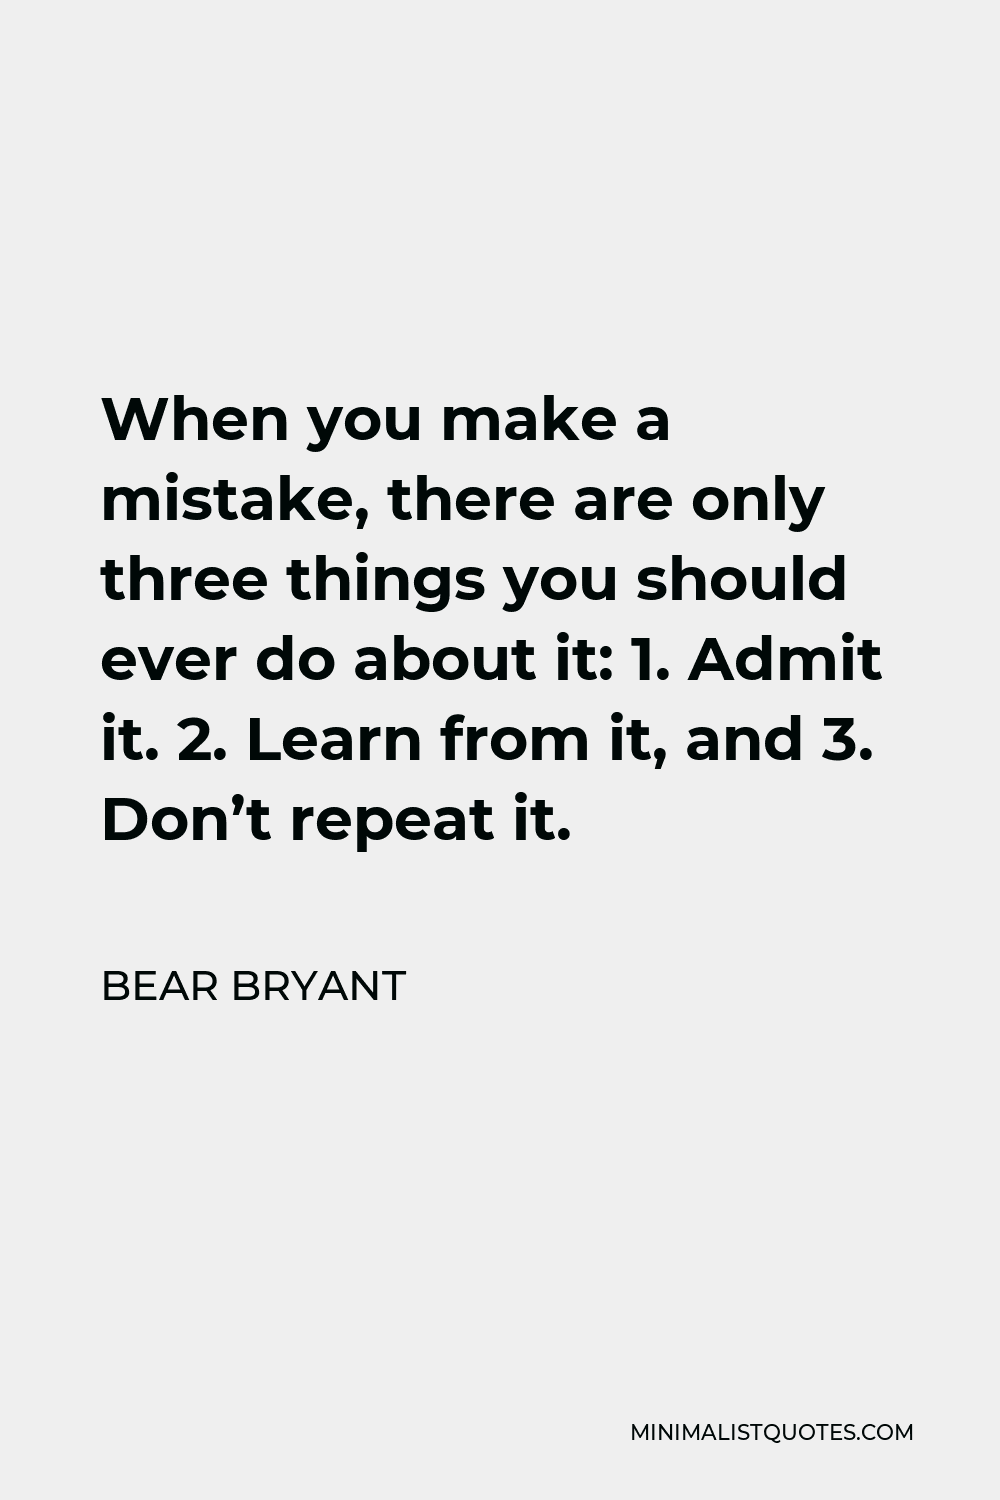 Bear Bryant Quote - When you make a mistake, there are only three things you should ever do about it: 1. Admit it. 2. Learn from it, and 3. Don’t repeat it.